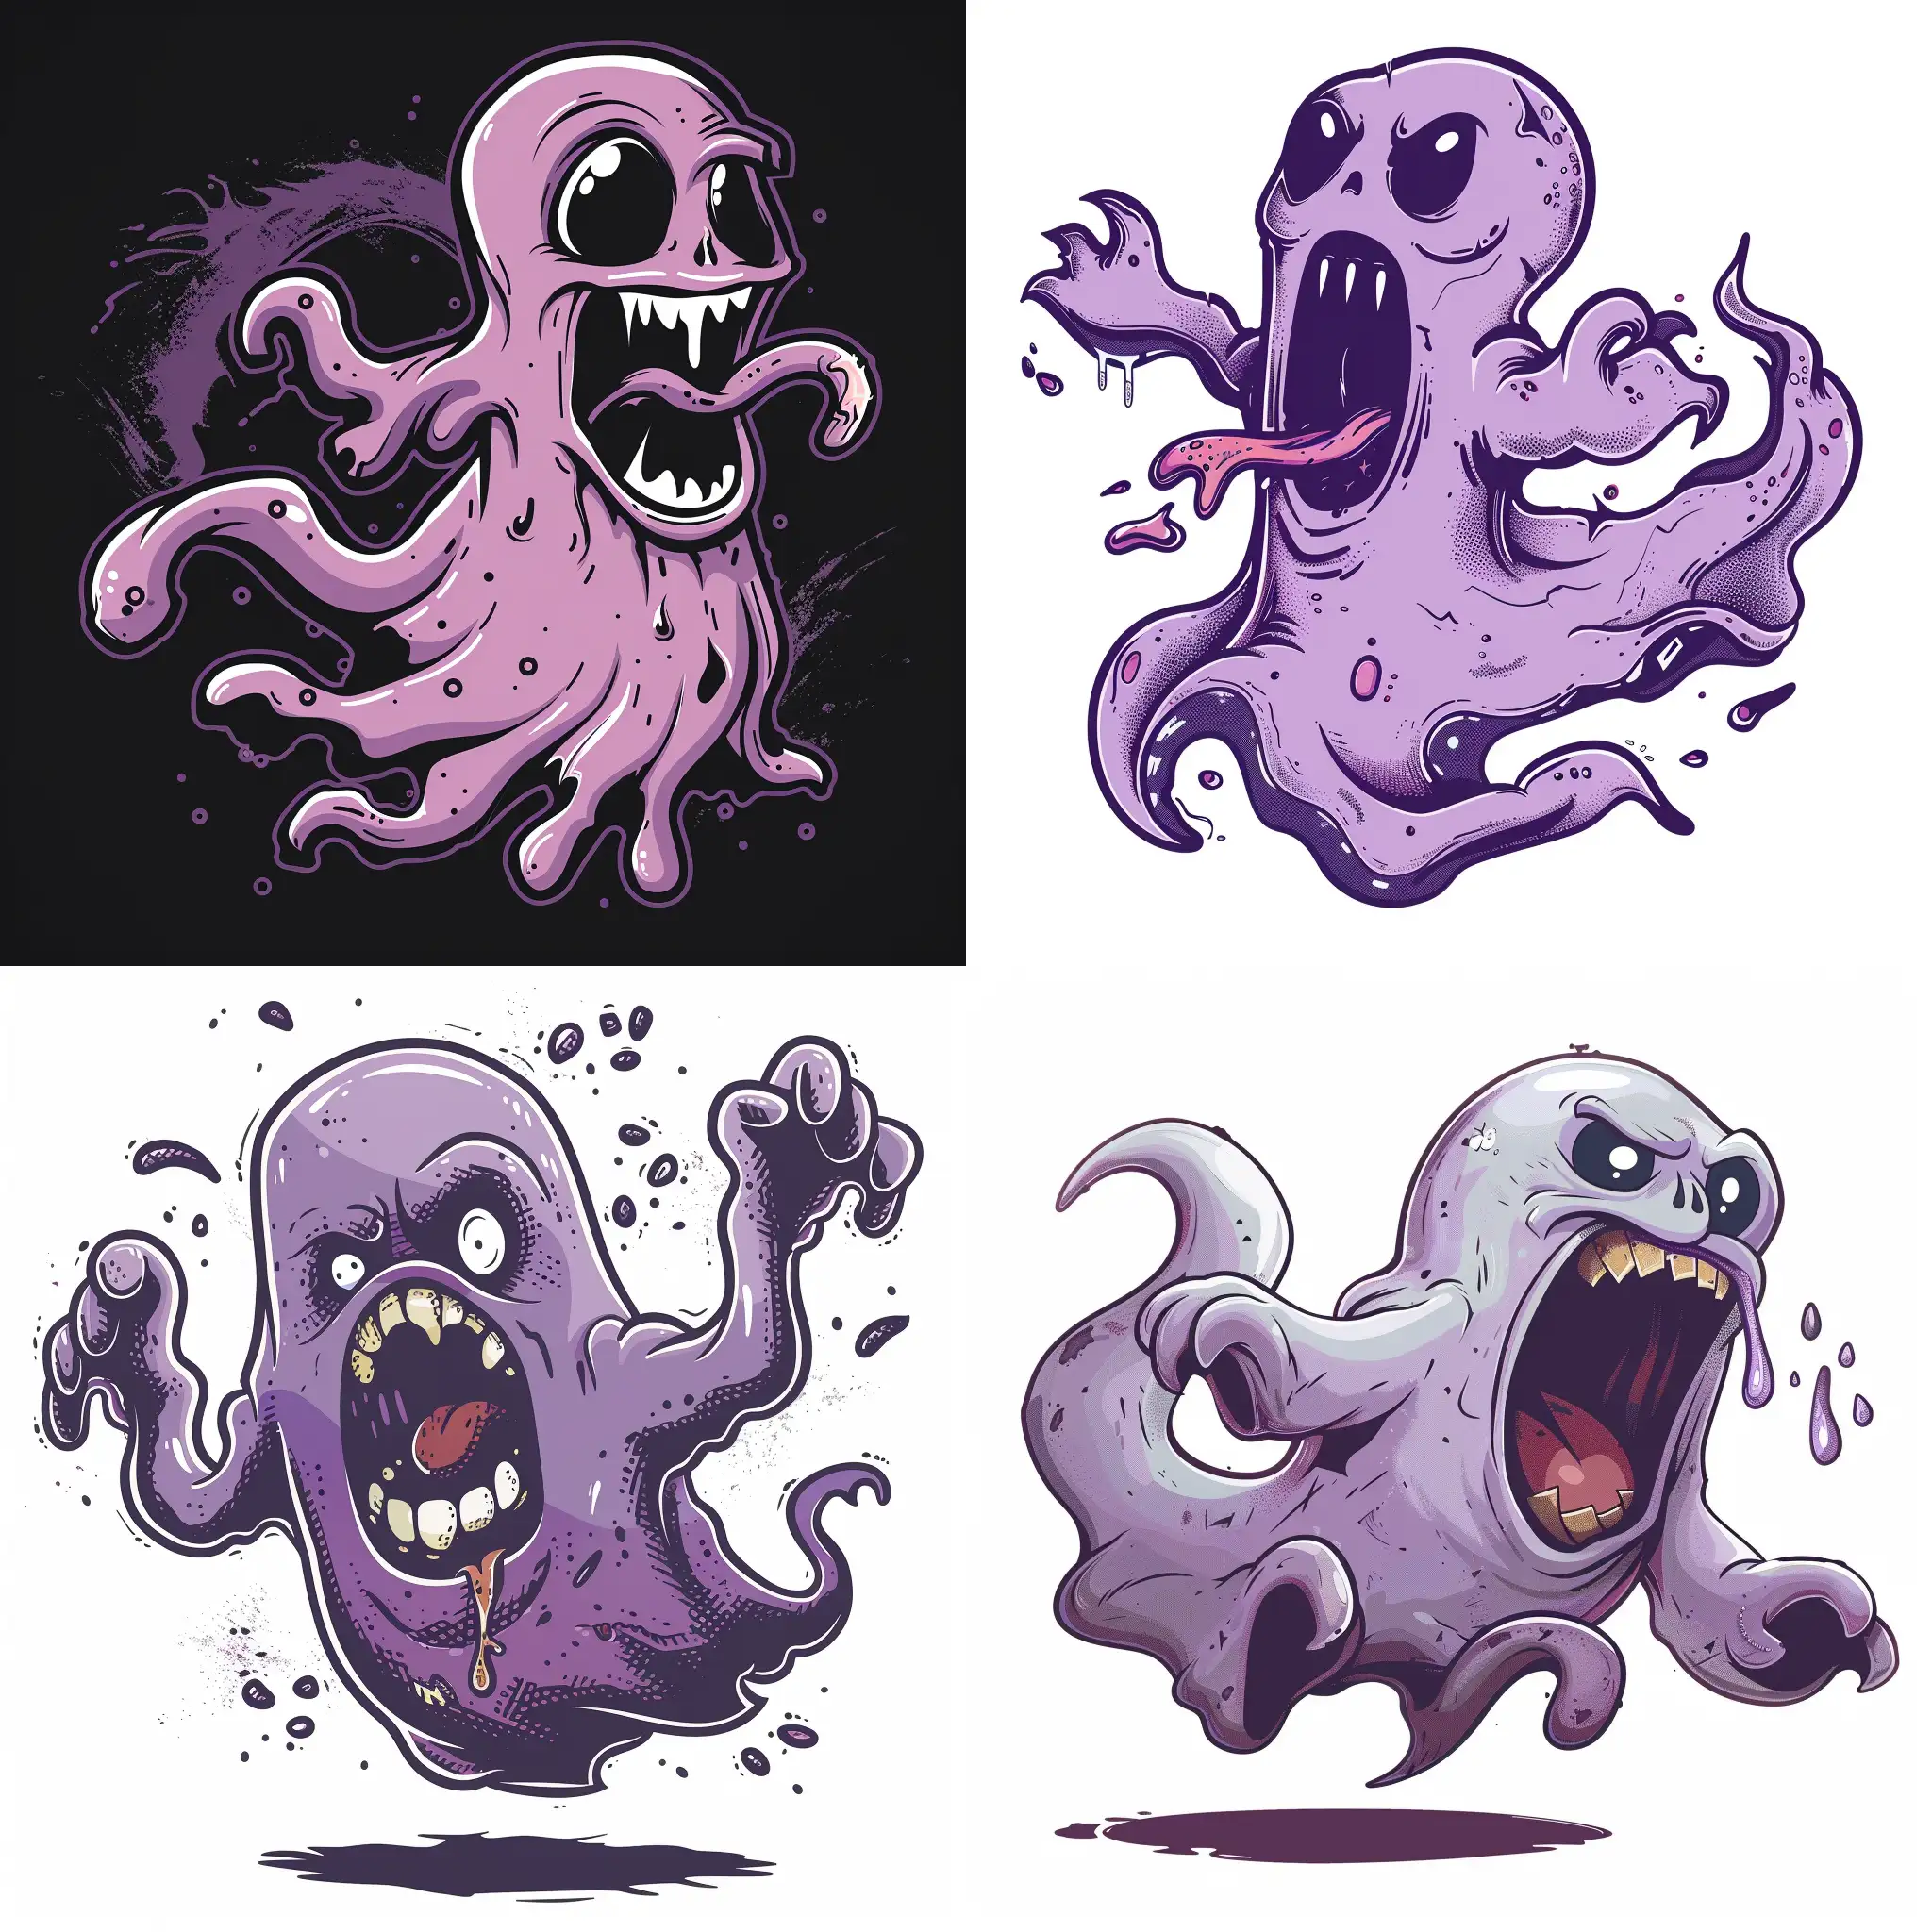 A scary purple ghost jumping around with drooling saliva due to hunger